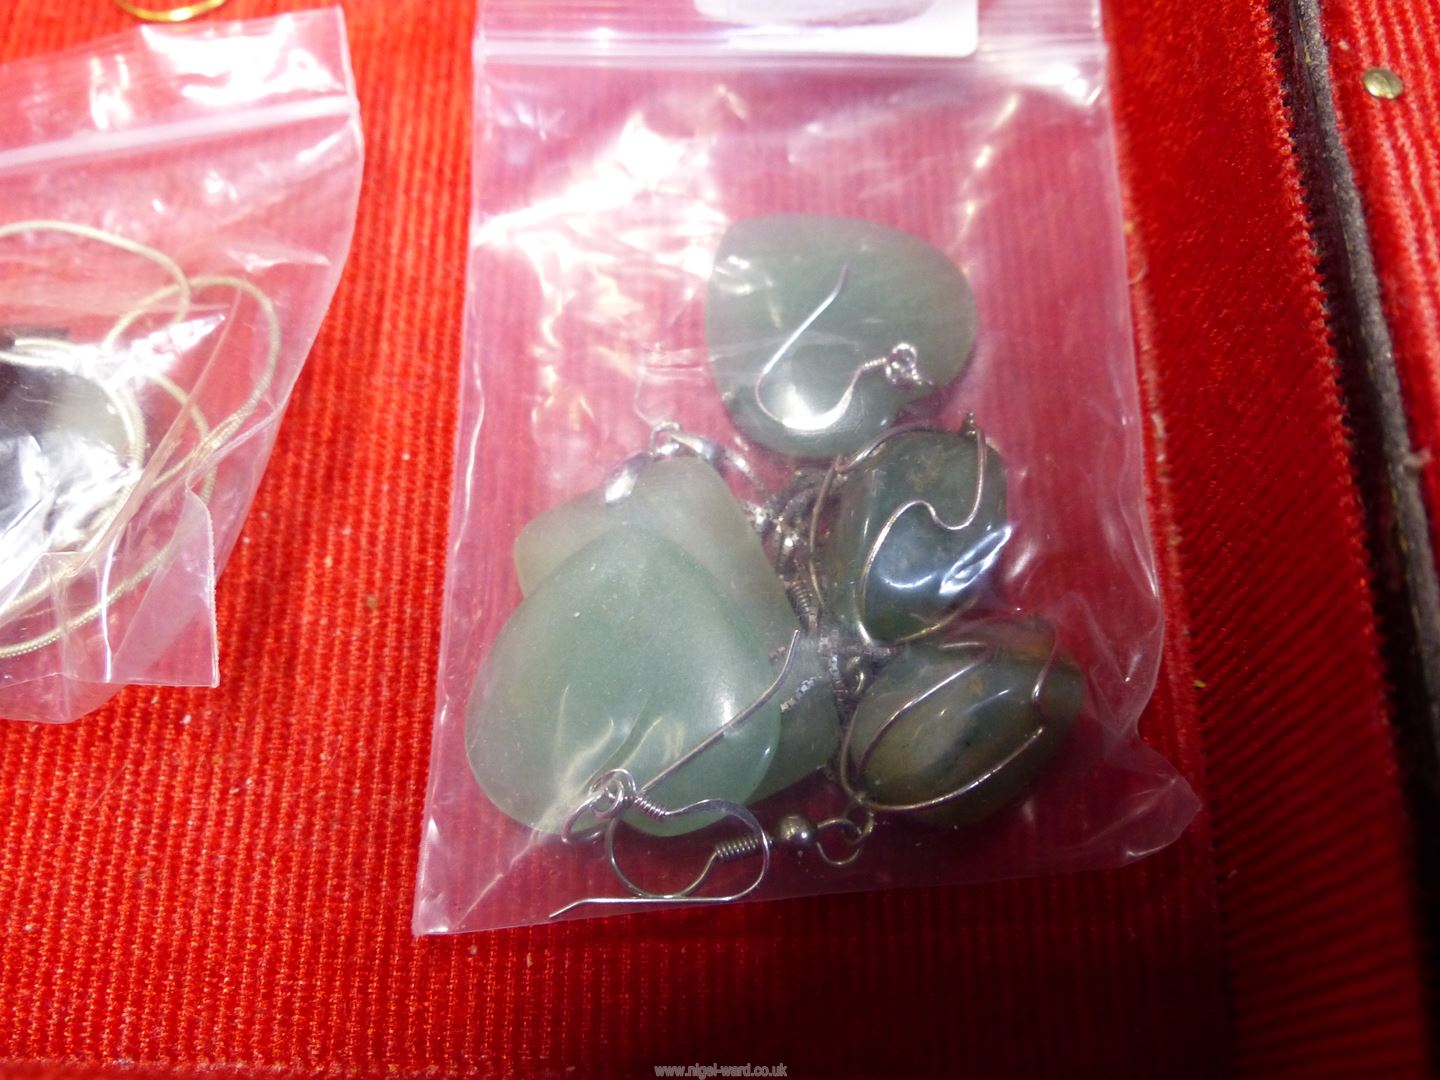 A small quantity of Jade and Sterling Silver jewellery including earrings, necklaces, bangles, etc. - Image 4 of 5